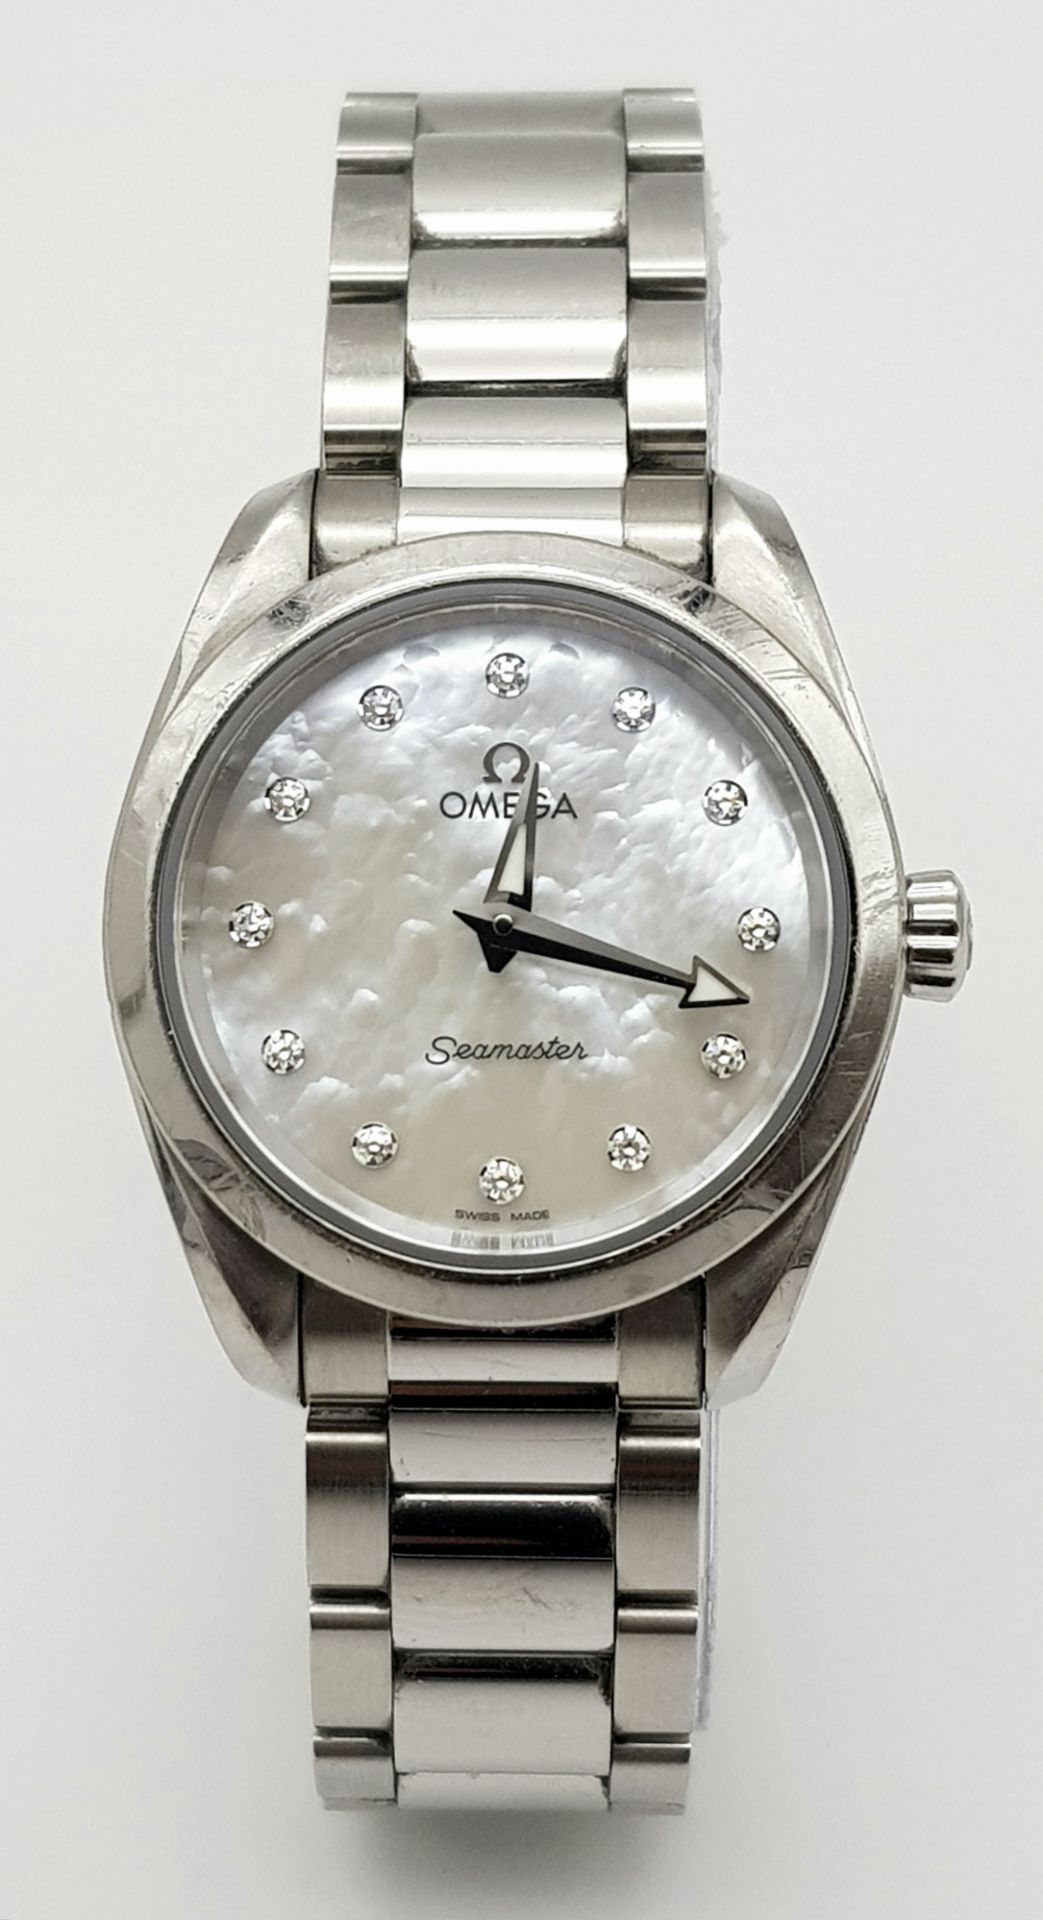 A STUNNING OMEGA "SEAMASTER" LADIES WATCH IN STAINLESS STEEL WITH MOTHER OF PEARL DIAL AND DIAMOND - Image 2 of 8